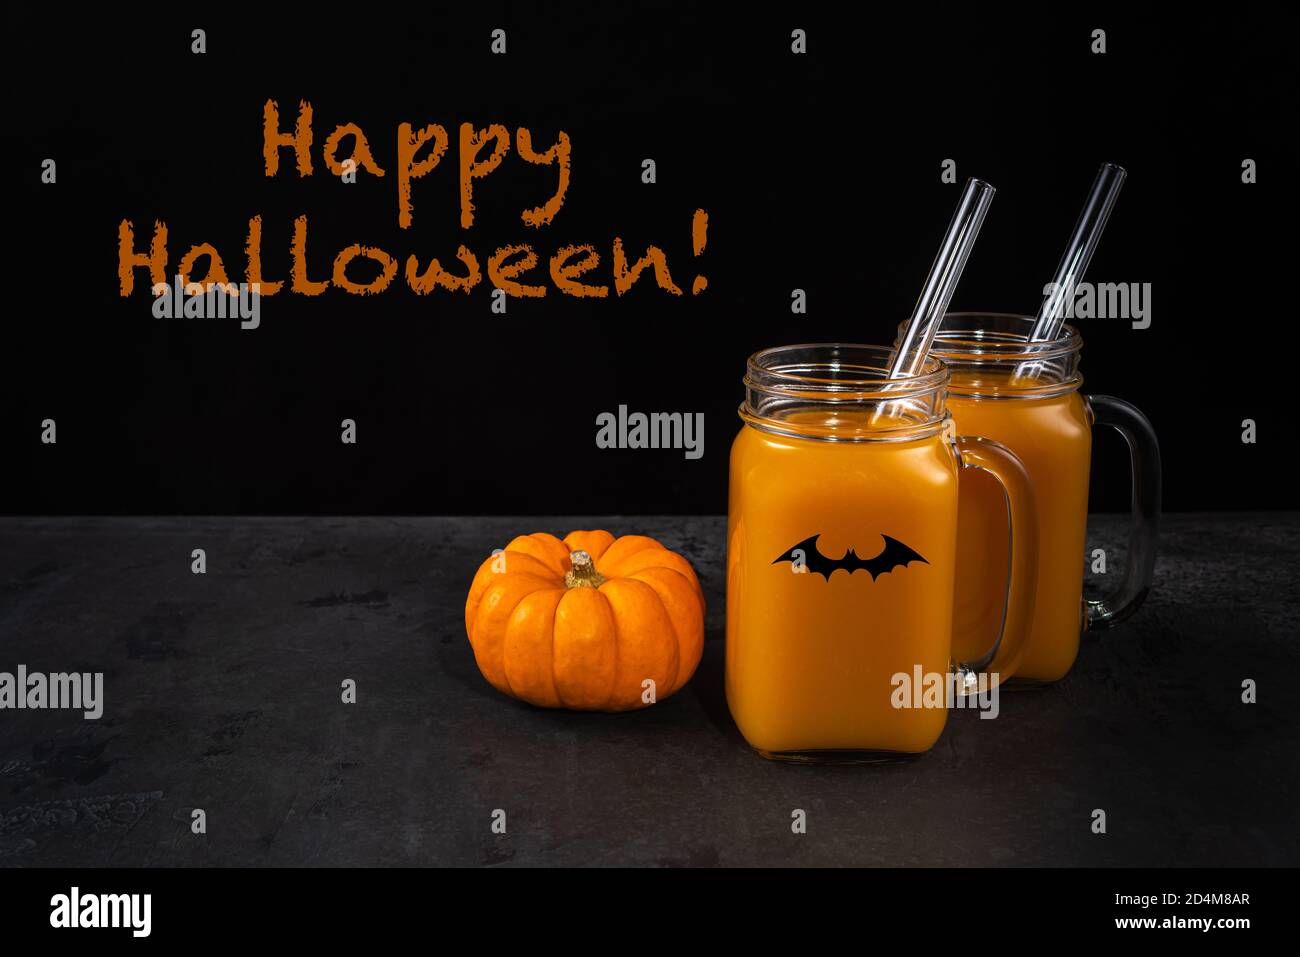 Two square glass jars with black bat. Non-alcoholic orange pumpkin mocktail and glass straws on black textured surface. Whole pumpkin is near jars. Ha Stock Photo